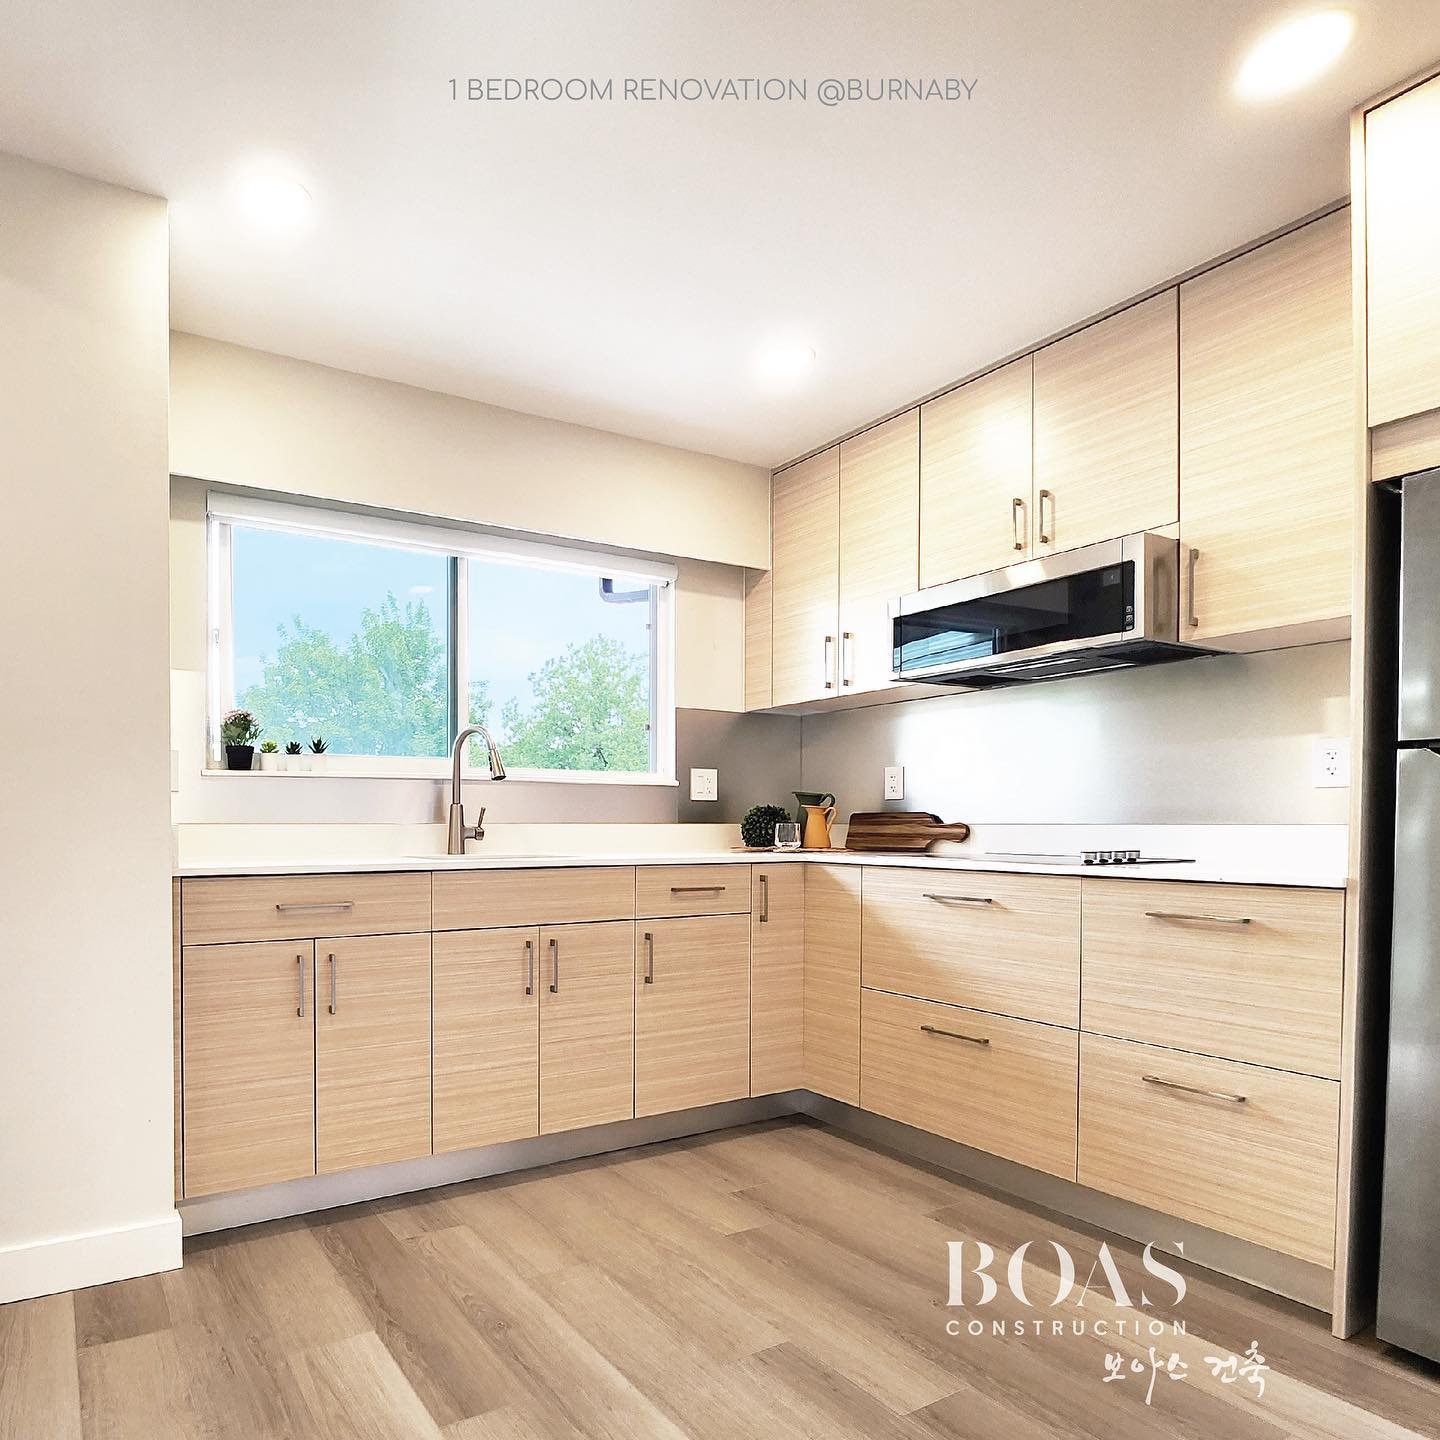 Burnaby Residential Project : 1bedroom 472 sf
.
.
.
#constructionvancouver #construction #architecture #architect #renovation #civil #civilengineering #interior #builder #contractor #home #residential #homedesign #customcabinet #cabinetmaking #millwo